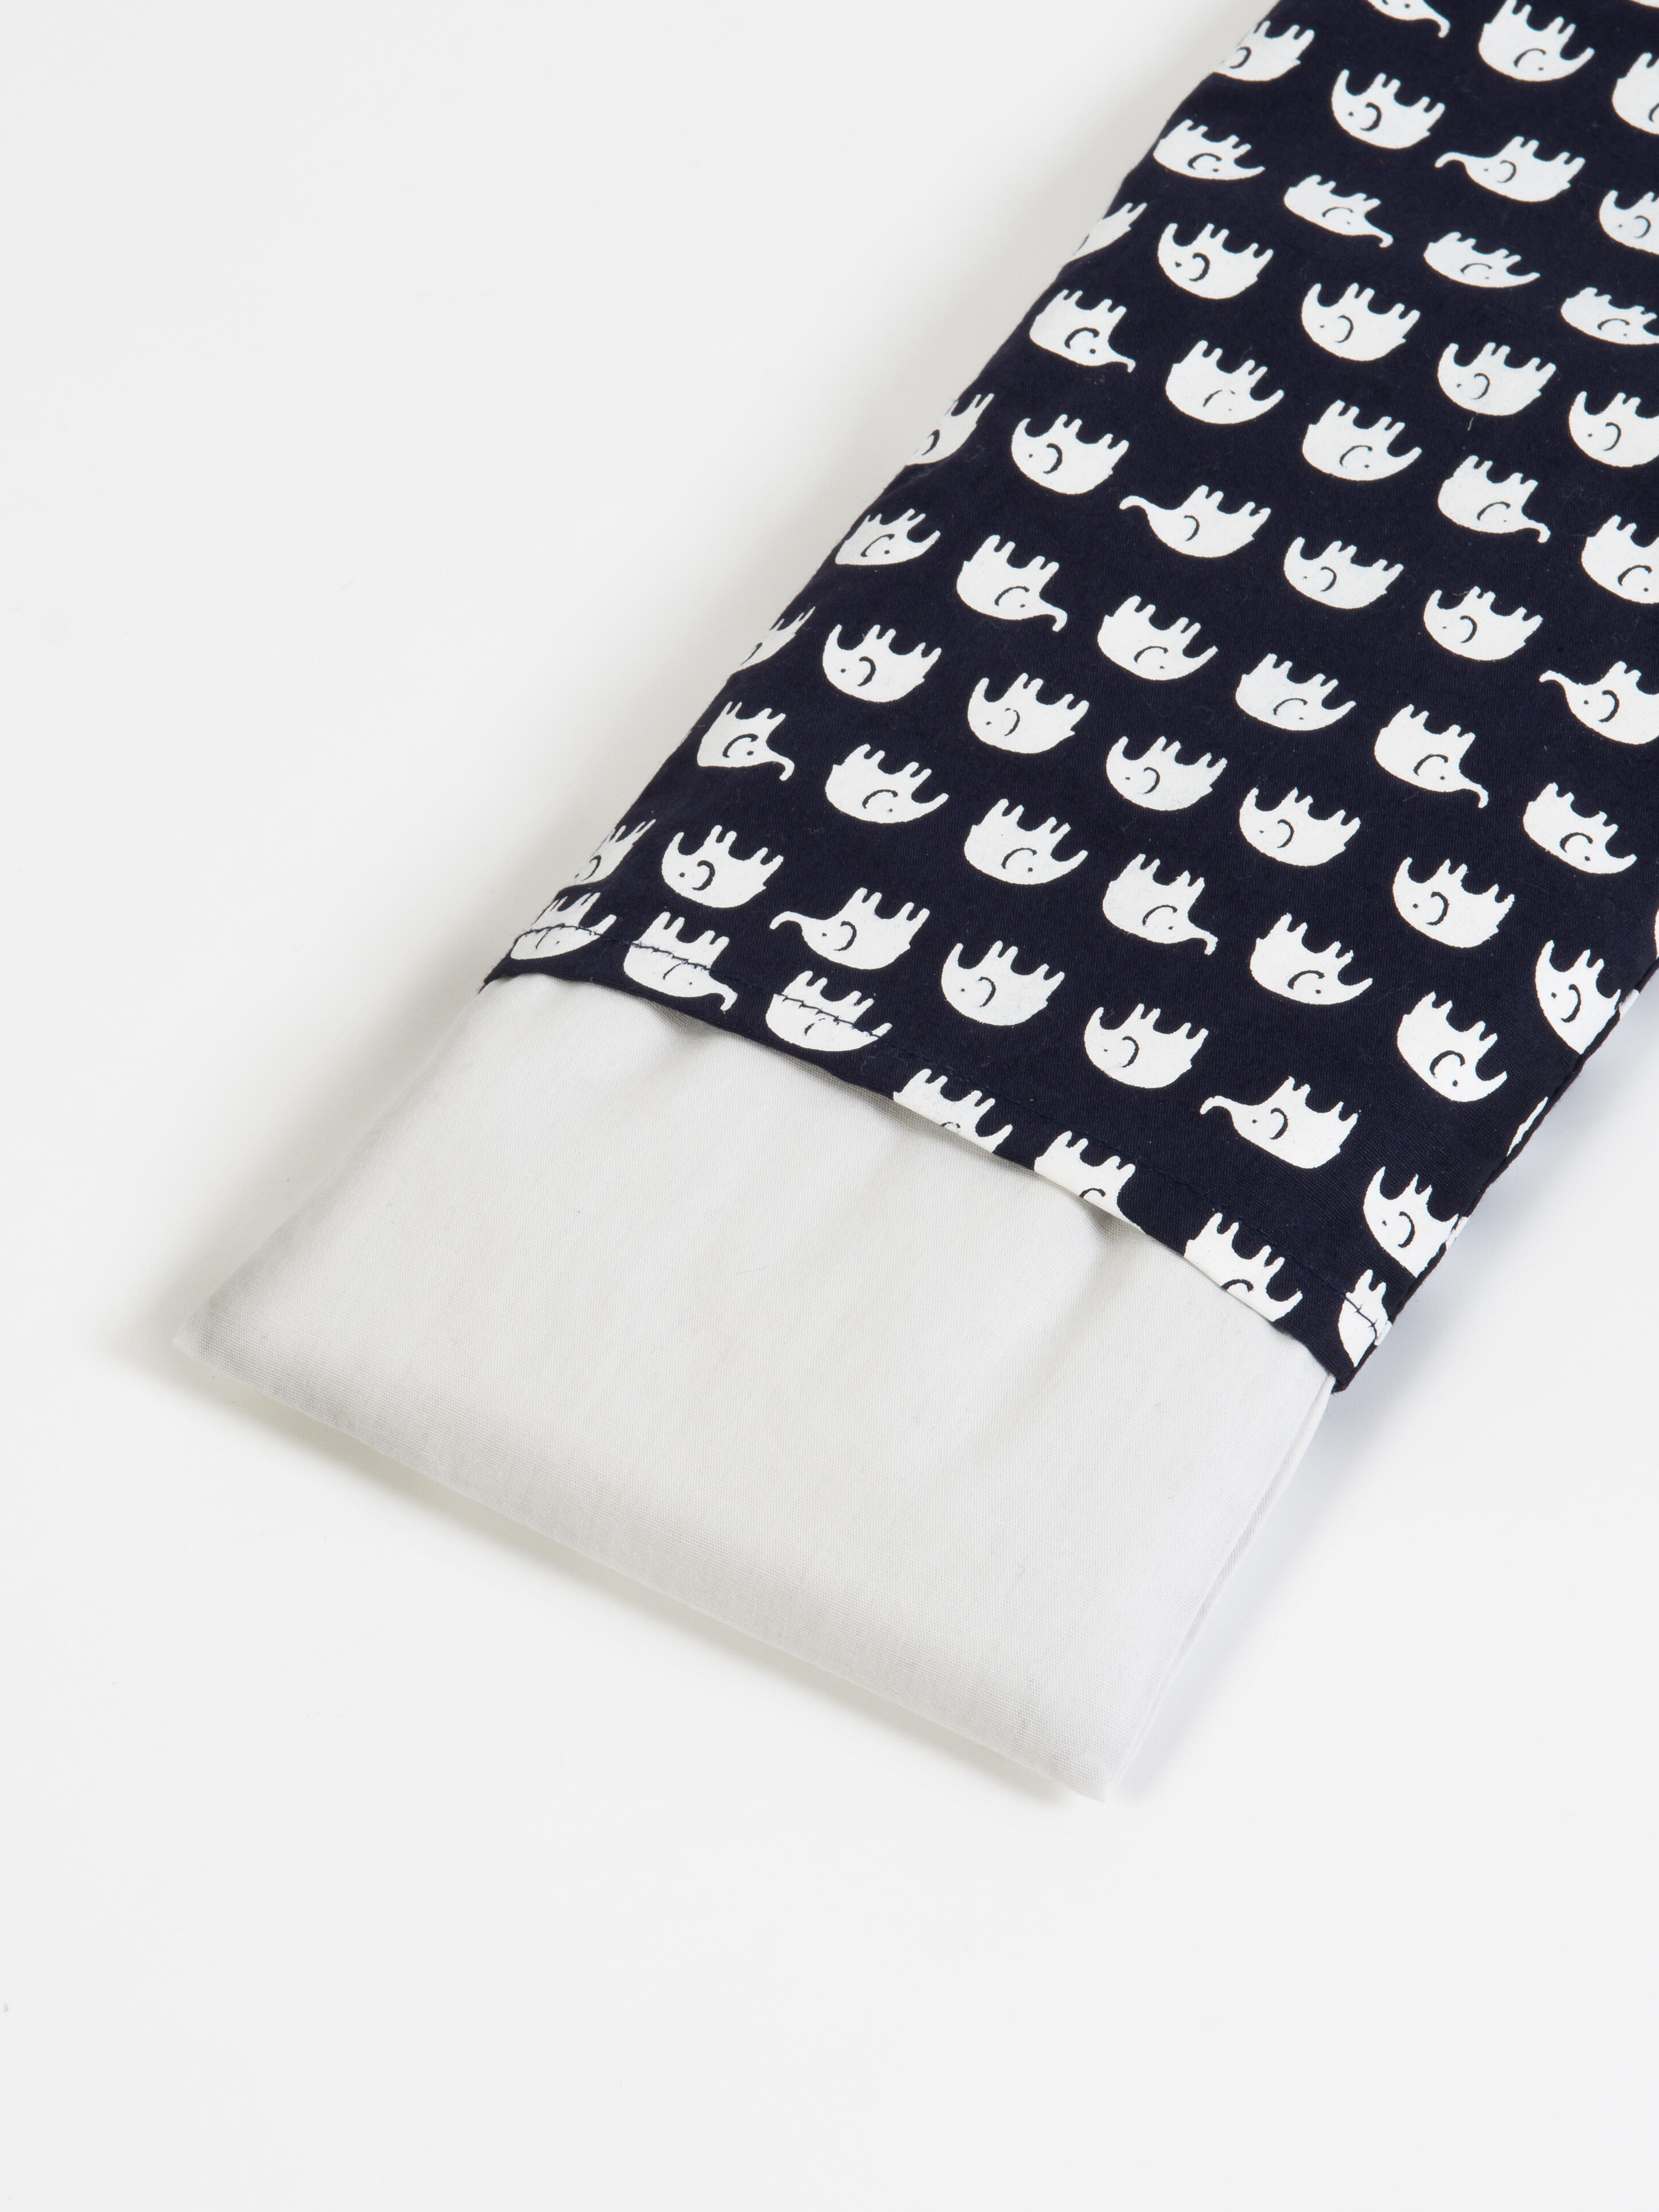 Yoga Studio Scented Lavender & Linseed Eye Pillows - Navy Elephant 2/2